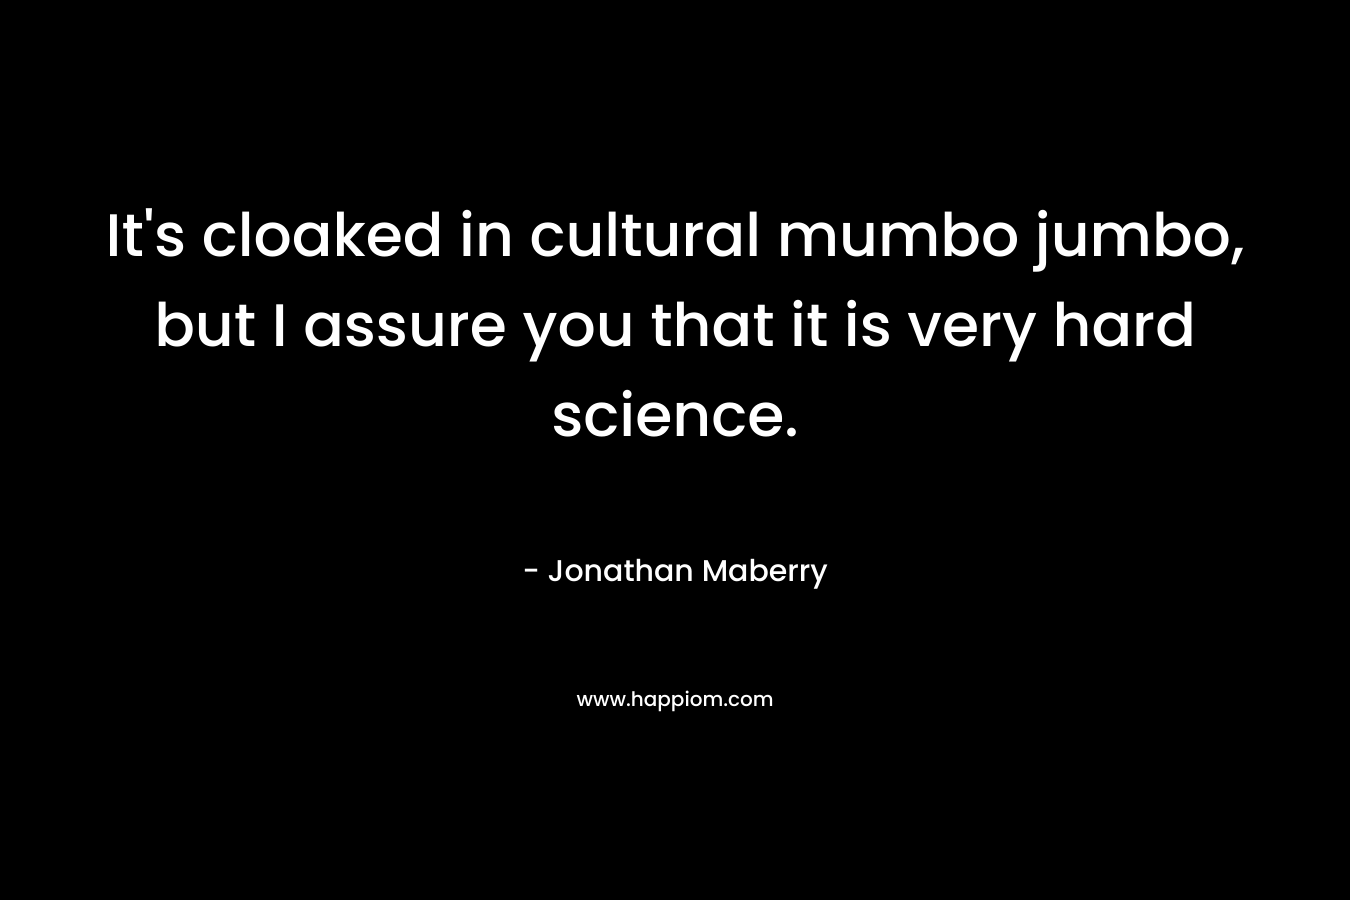 It’s cloaked in cultural mumbo jumbo, but I assure you that it is very hard science. – Jonathan Maberry